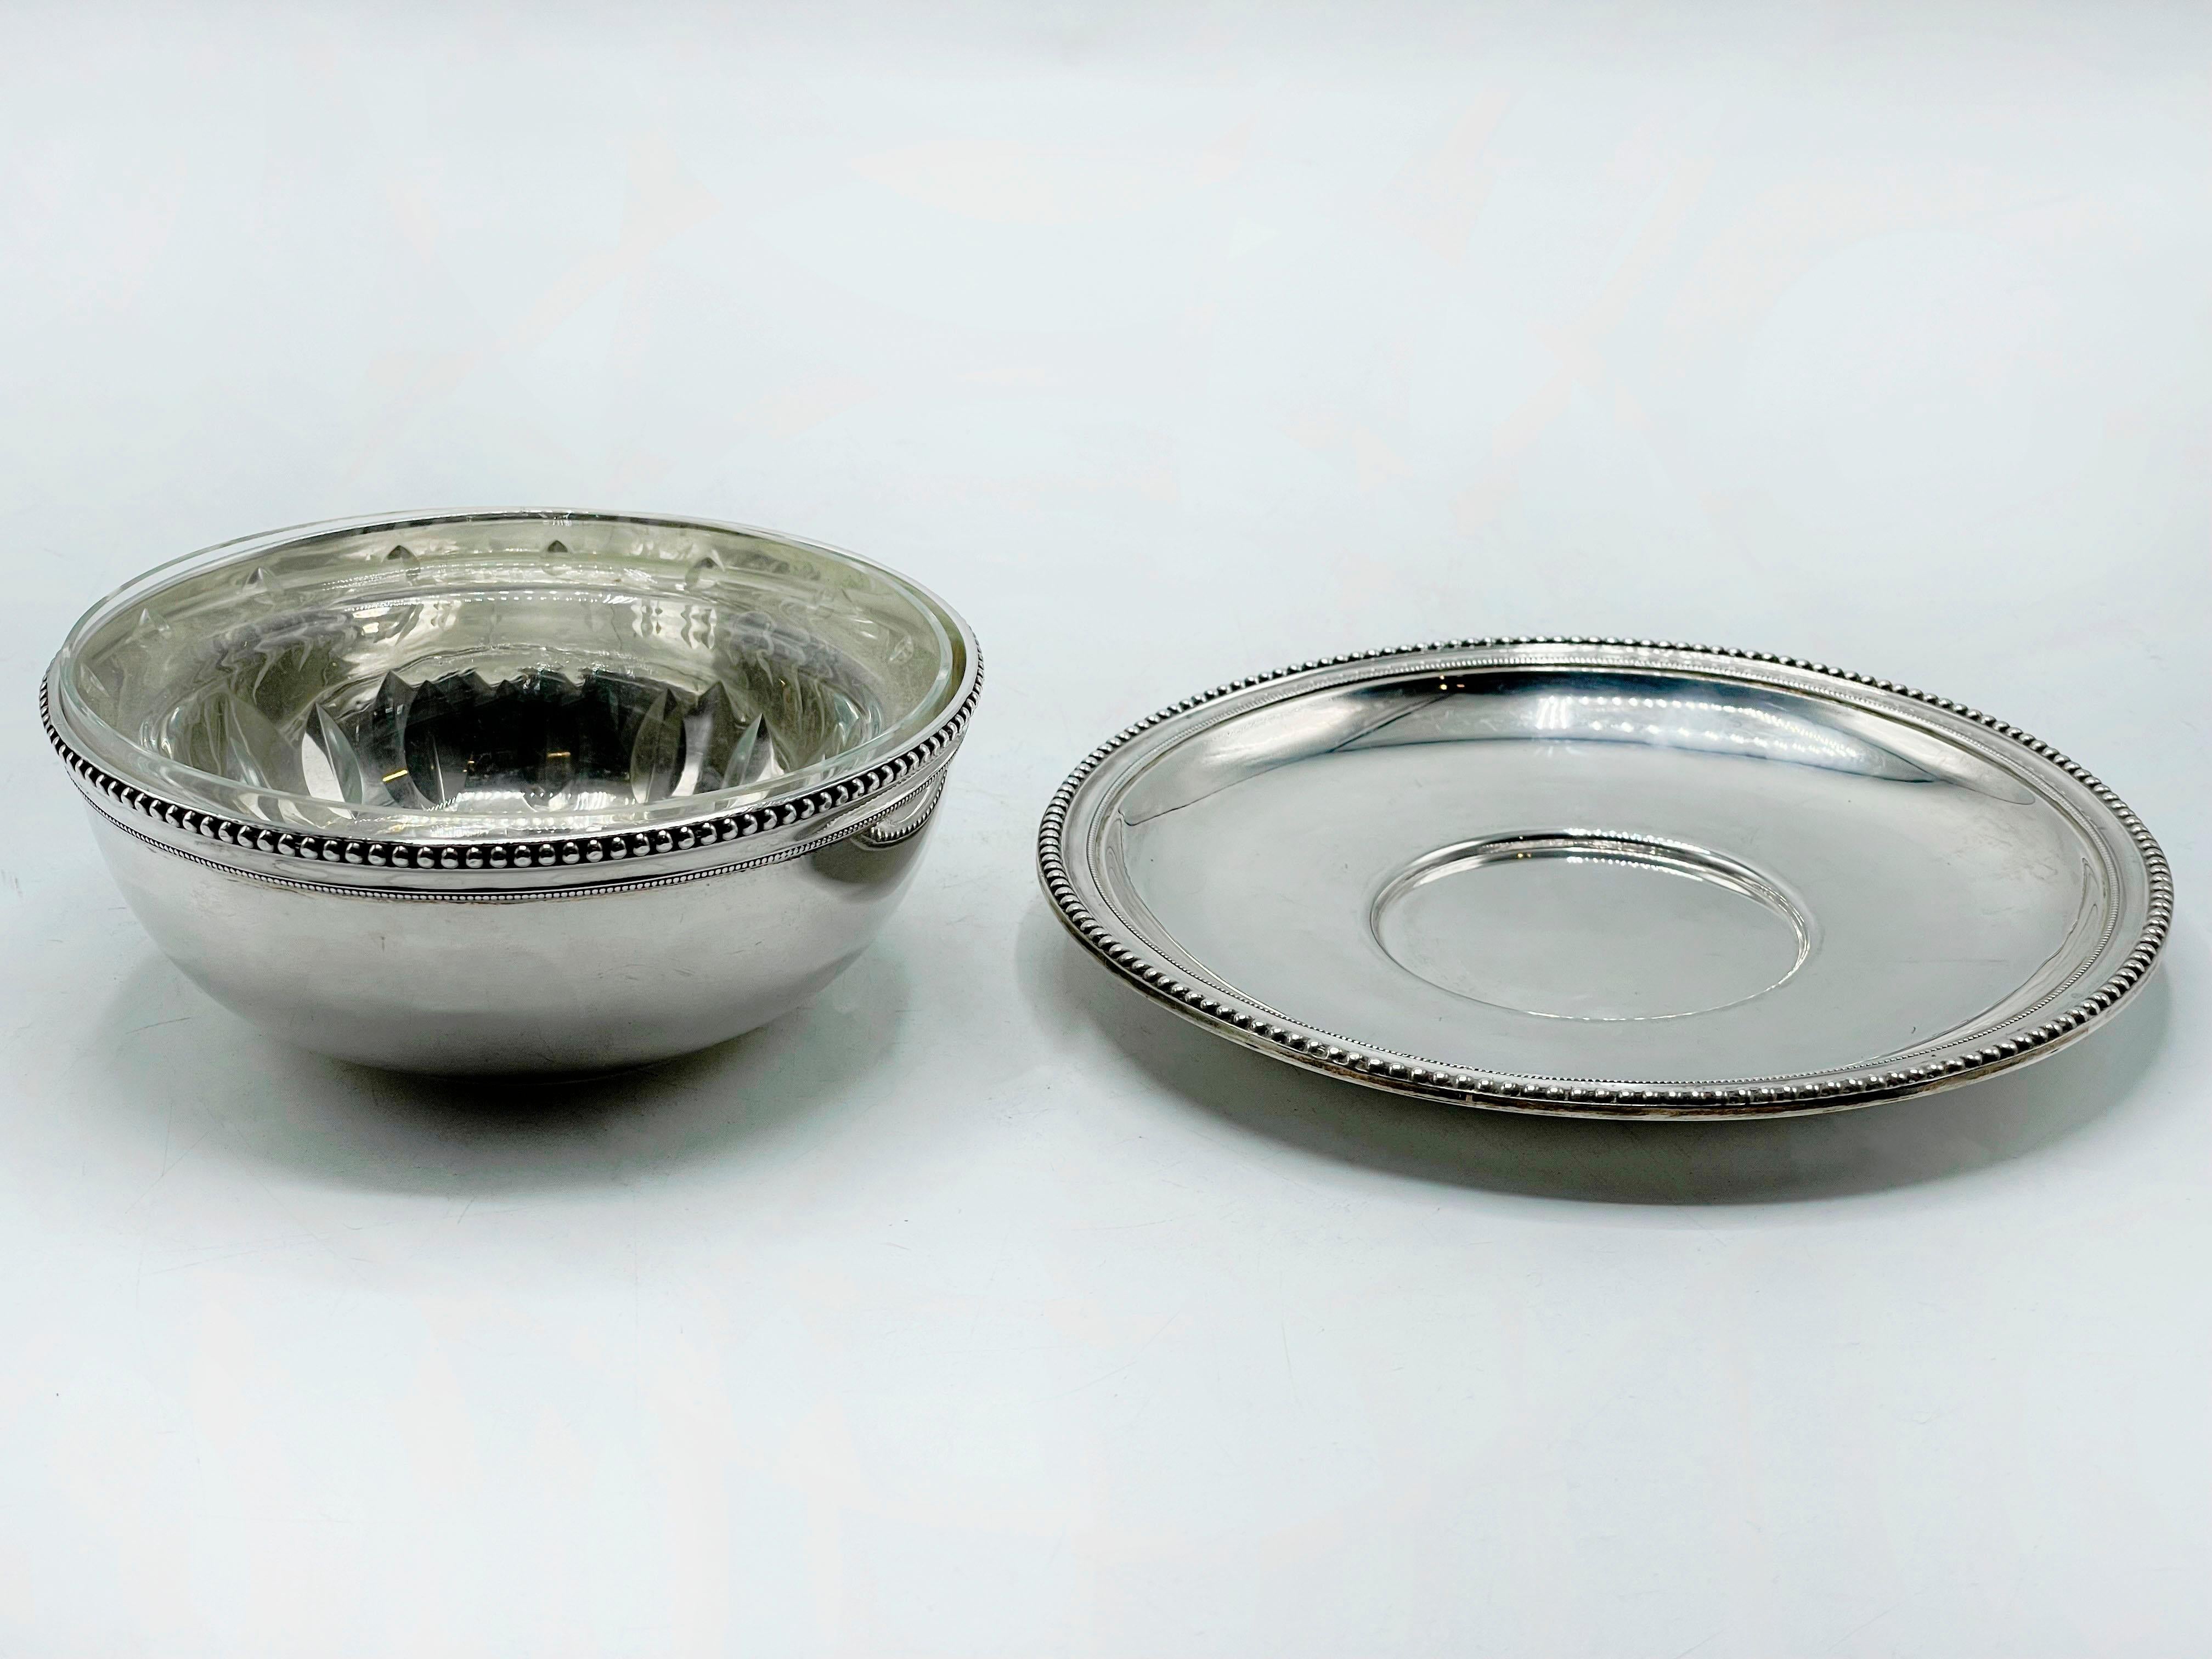 Puiforcat French Sterling Silver Dessert Compote Glass Bowl
Puiforcat, 2 sterling silver French dessert/compostery bowls and plate with a pretty curvilinear design and ornate edges. Each piece has stamps as shown.

Founded in 1820 by Emile